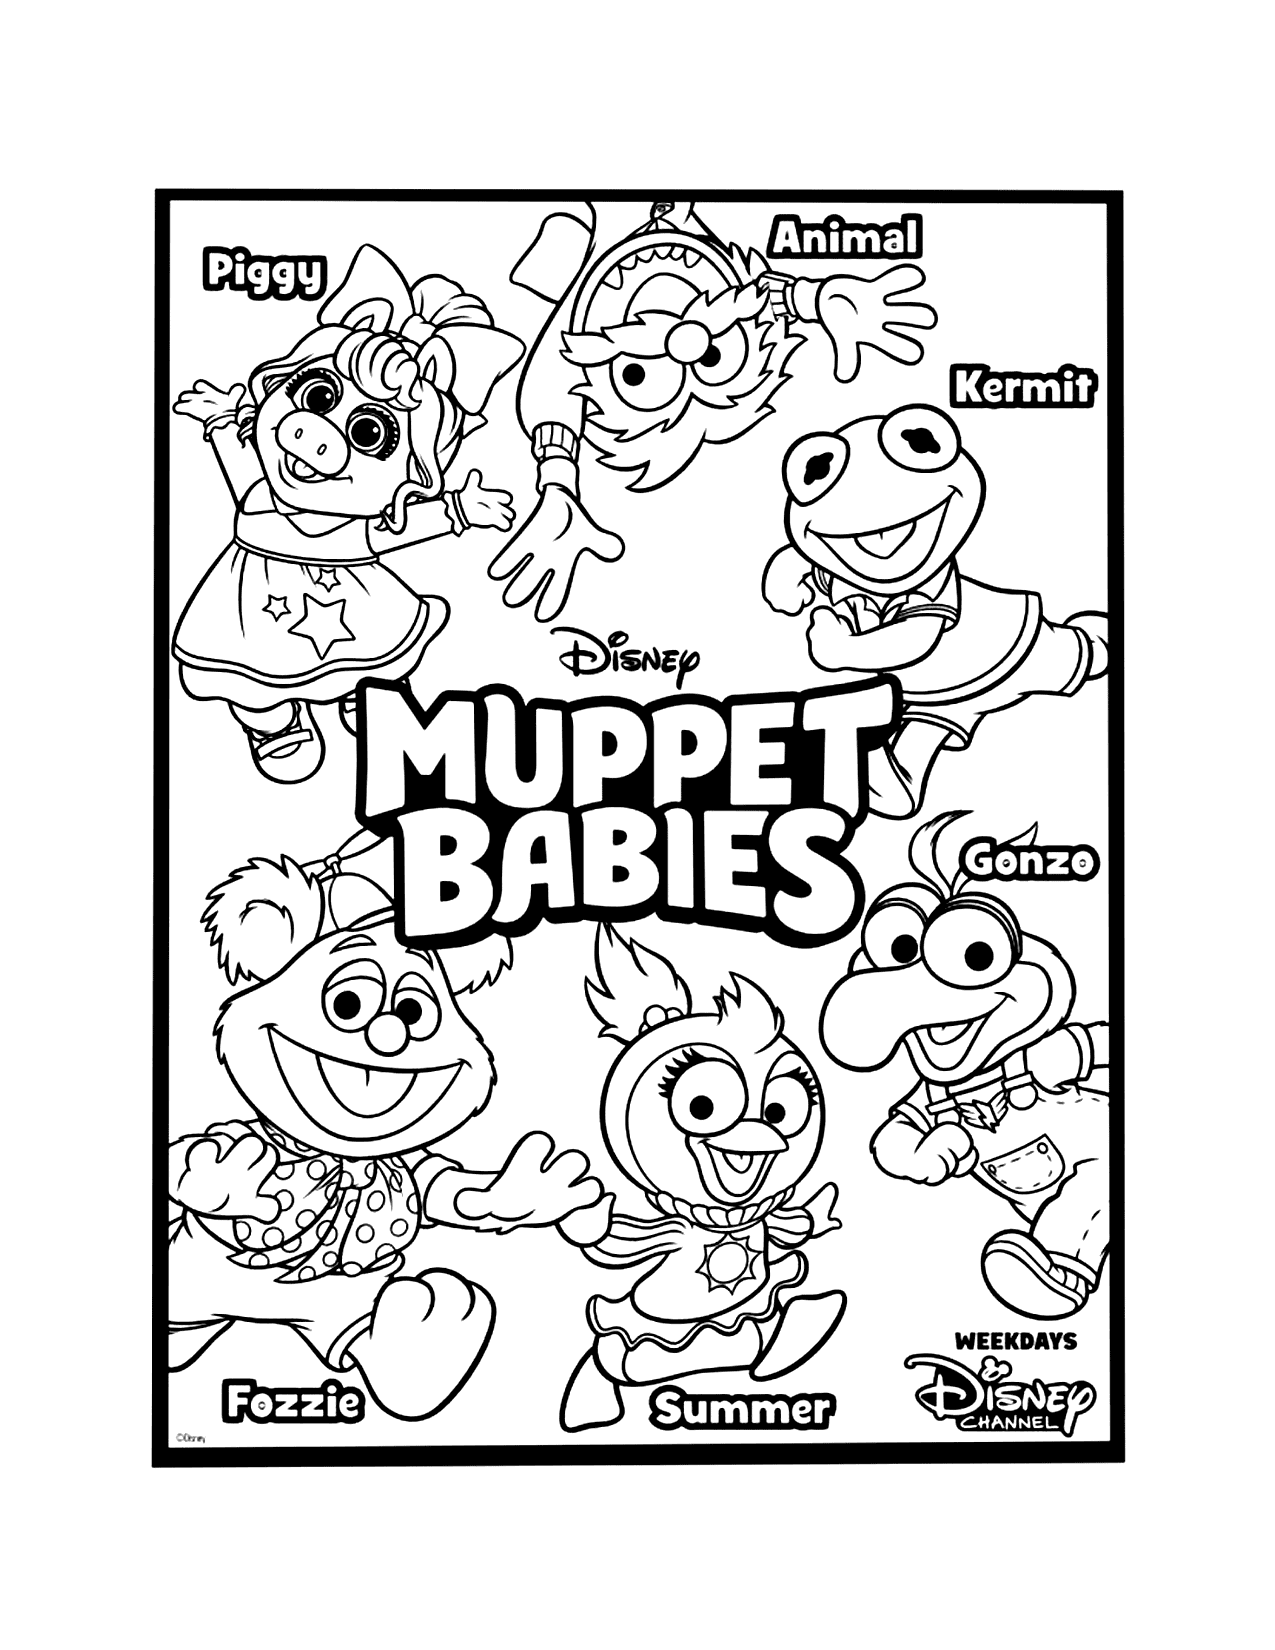 Muppet Babies Poster Coloring Page